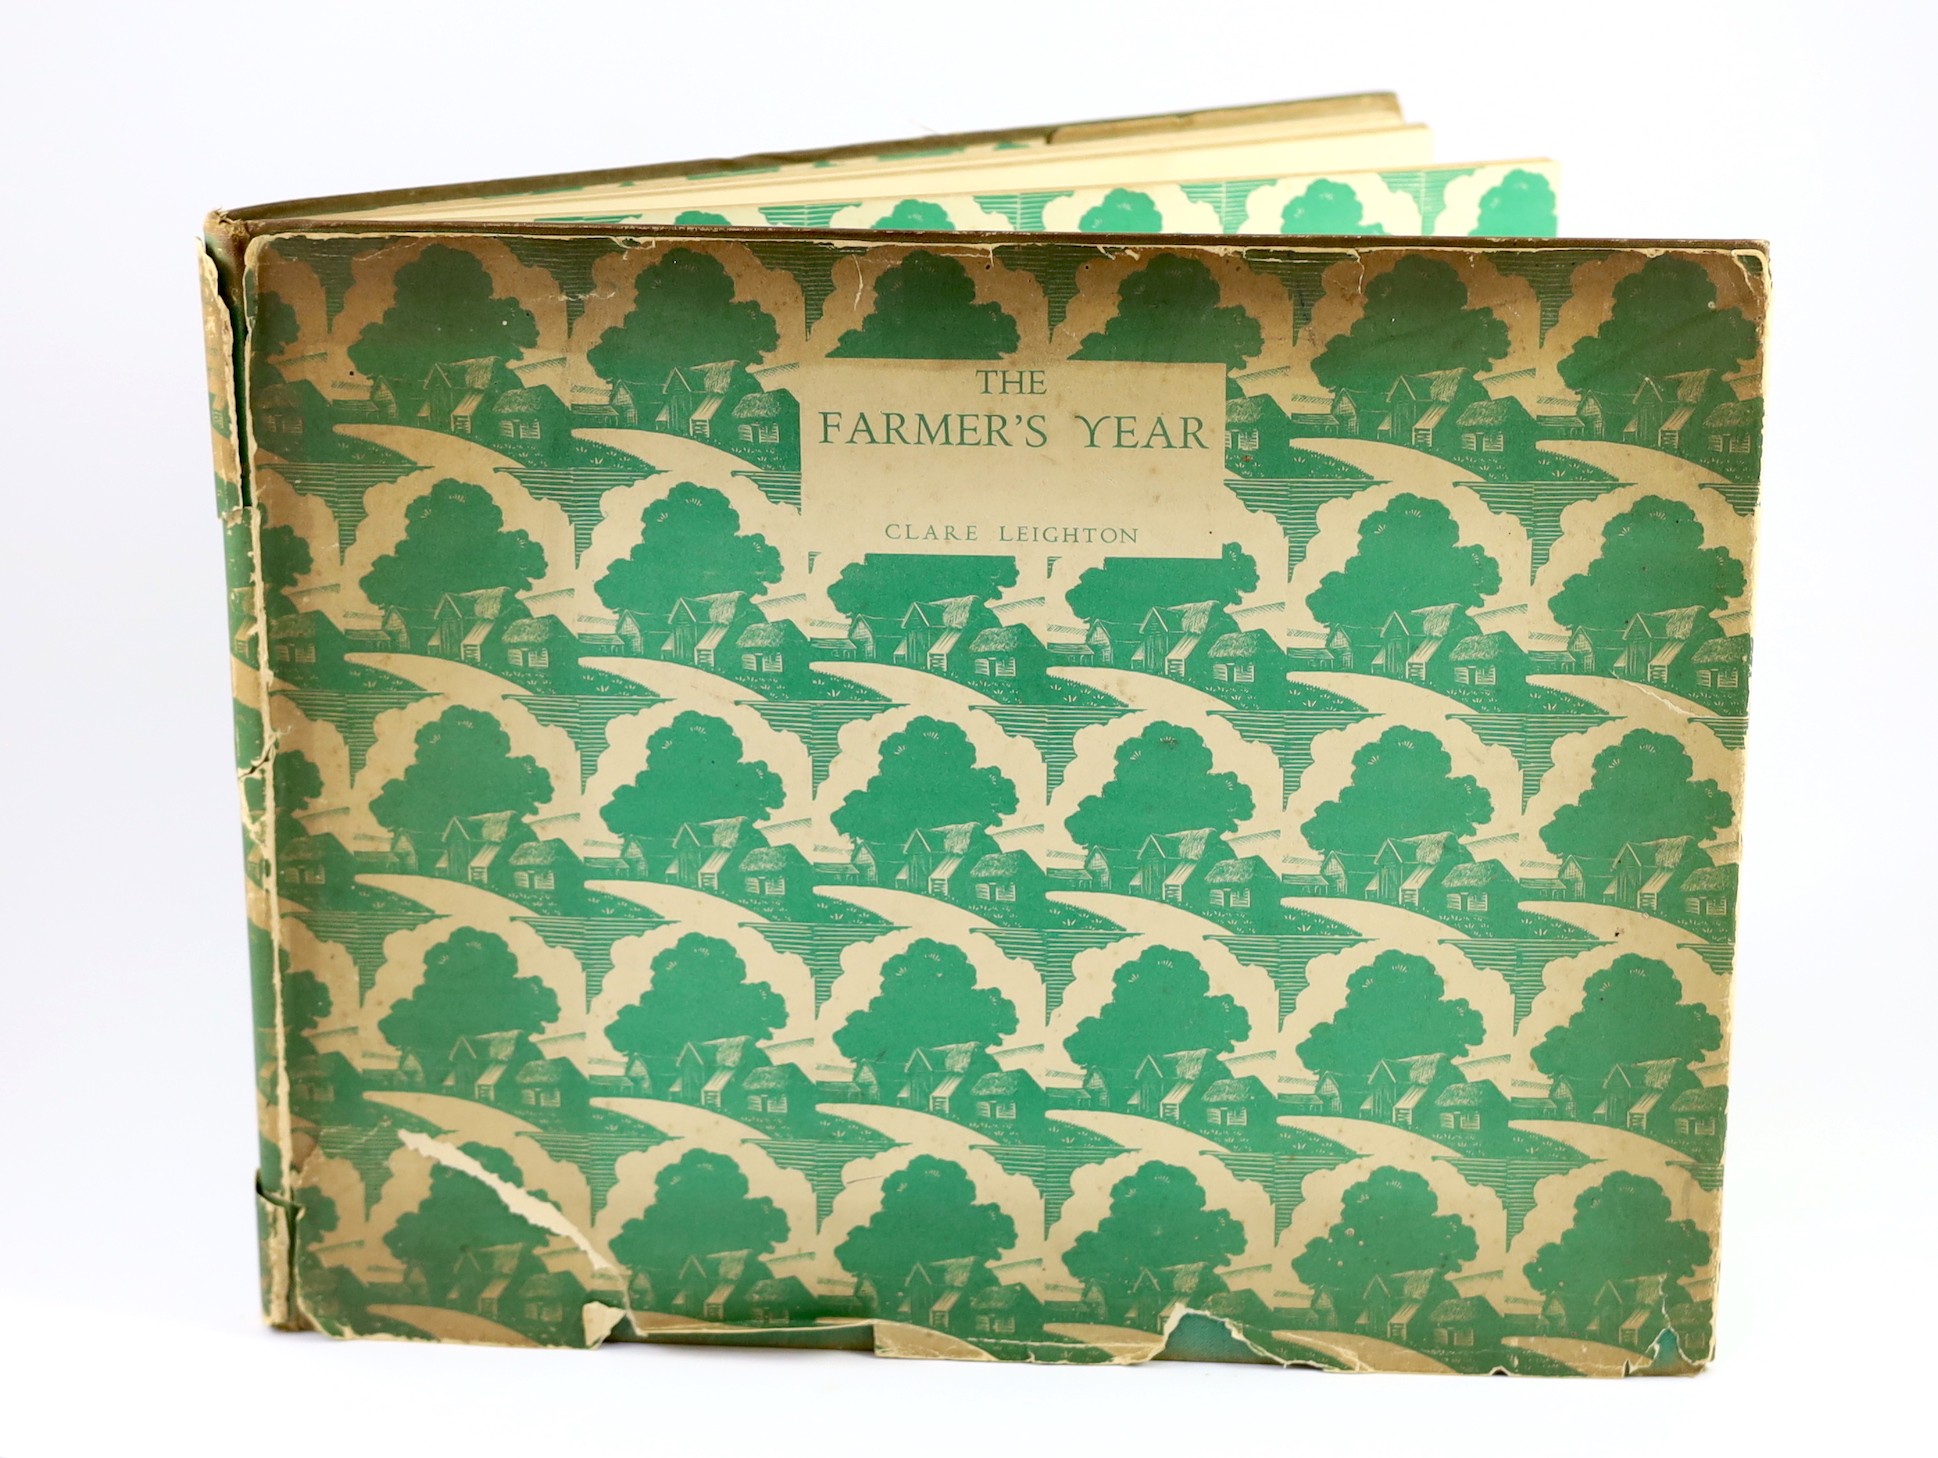 Leighton, Clare - The Farmer’s Year. A Calendar of English Husbandry, 1st edition, oblong folio, original green cloth, in unclipped d/j with tears and stains, with 12 plates, Collins, London, 1933